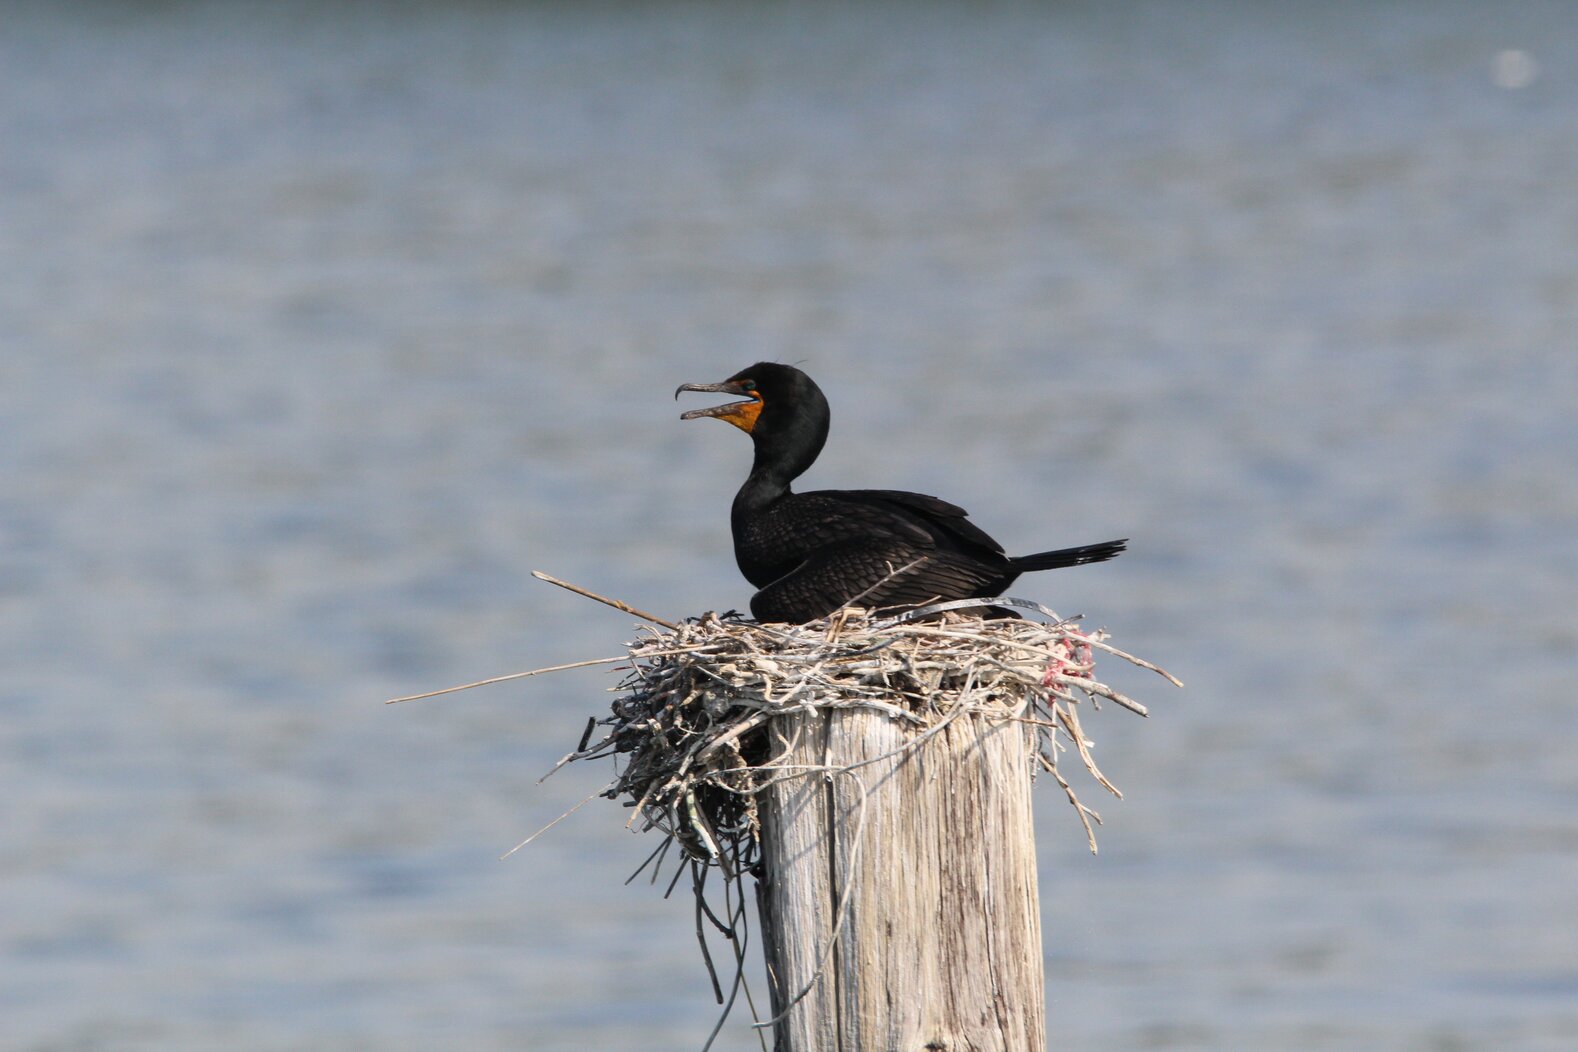 Double-crested Cormorants nest on pilings near Heritage Park. Photo: <a href="https://www.flickr.com/photos/89780664@N05/" target="_blank">Dave Ostapiuk</a>